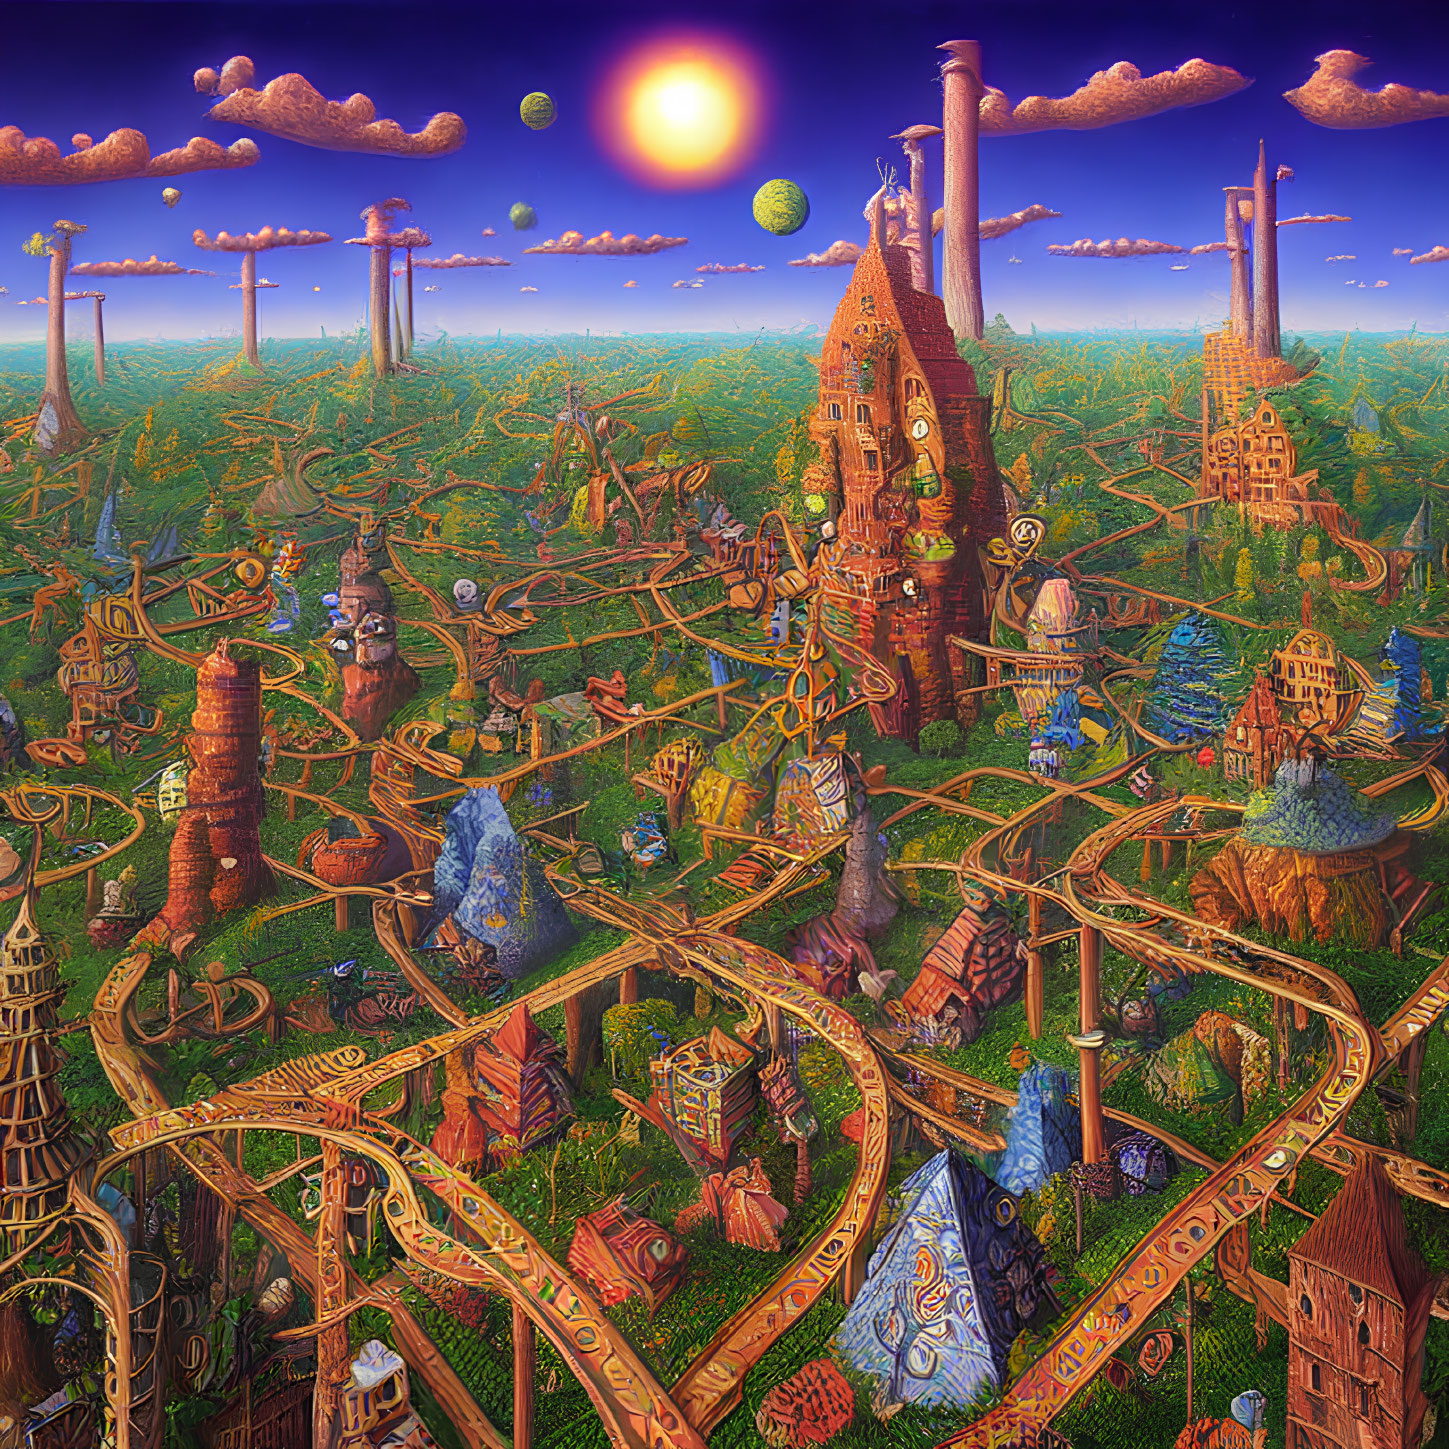 Fantastical landscape with whimsical architecture and rollercoaster tracks